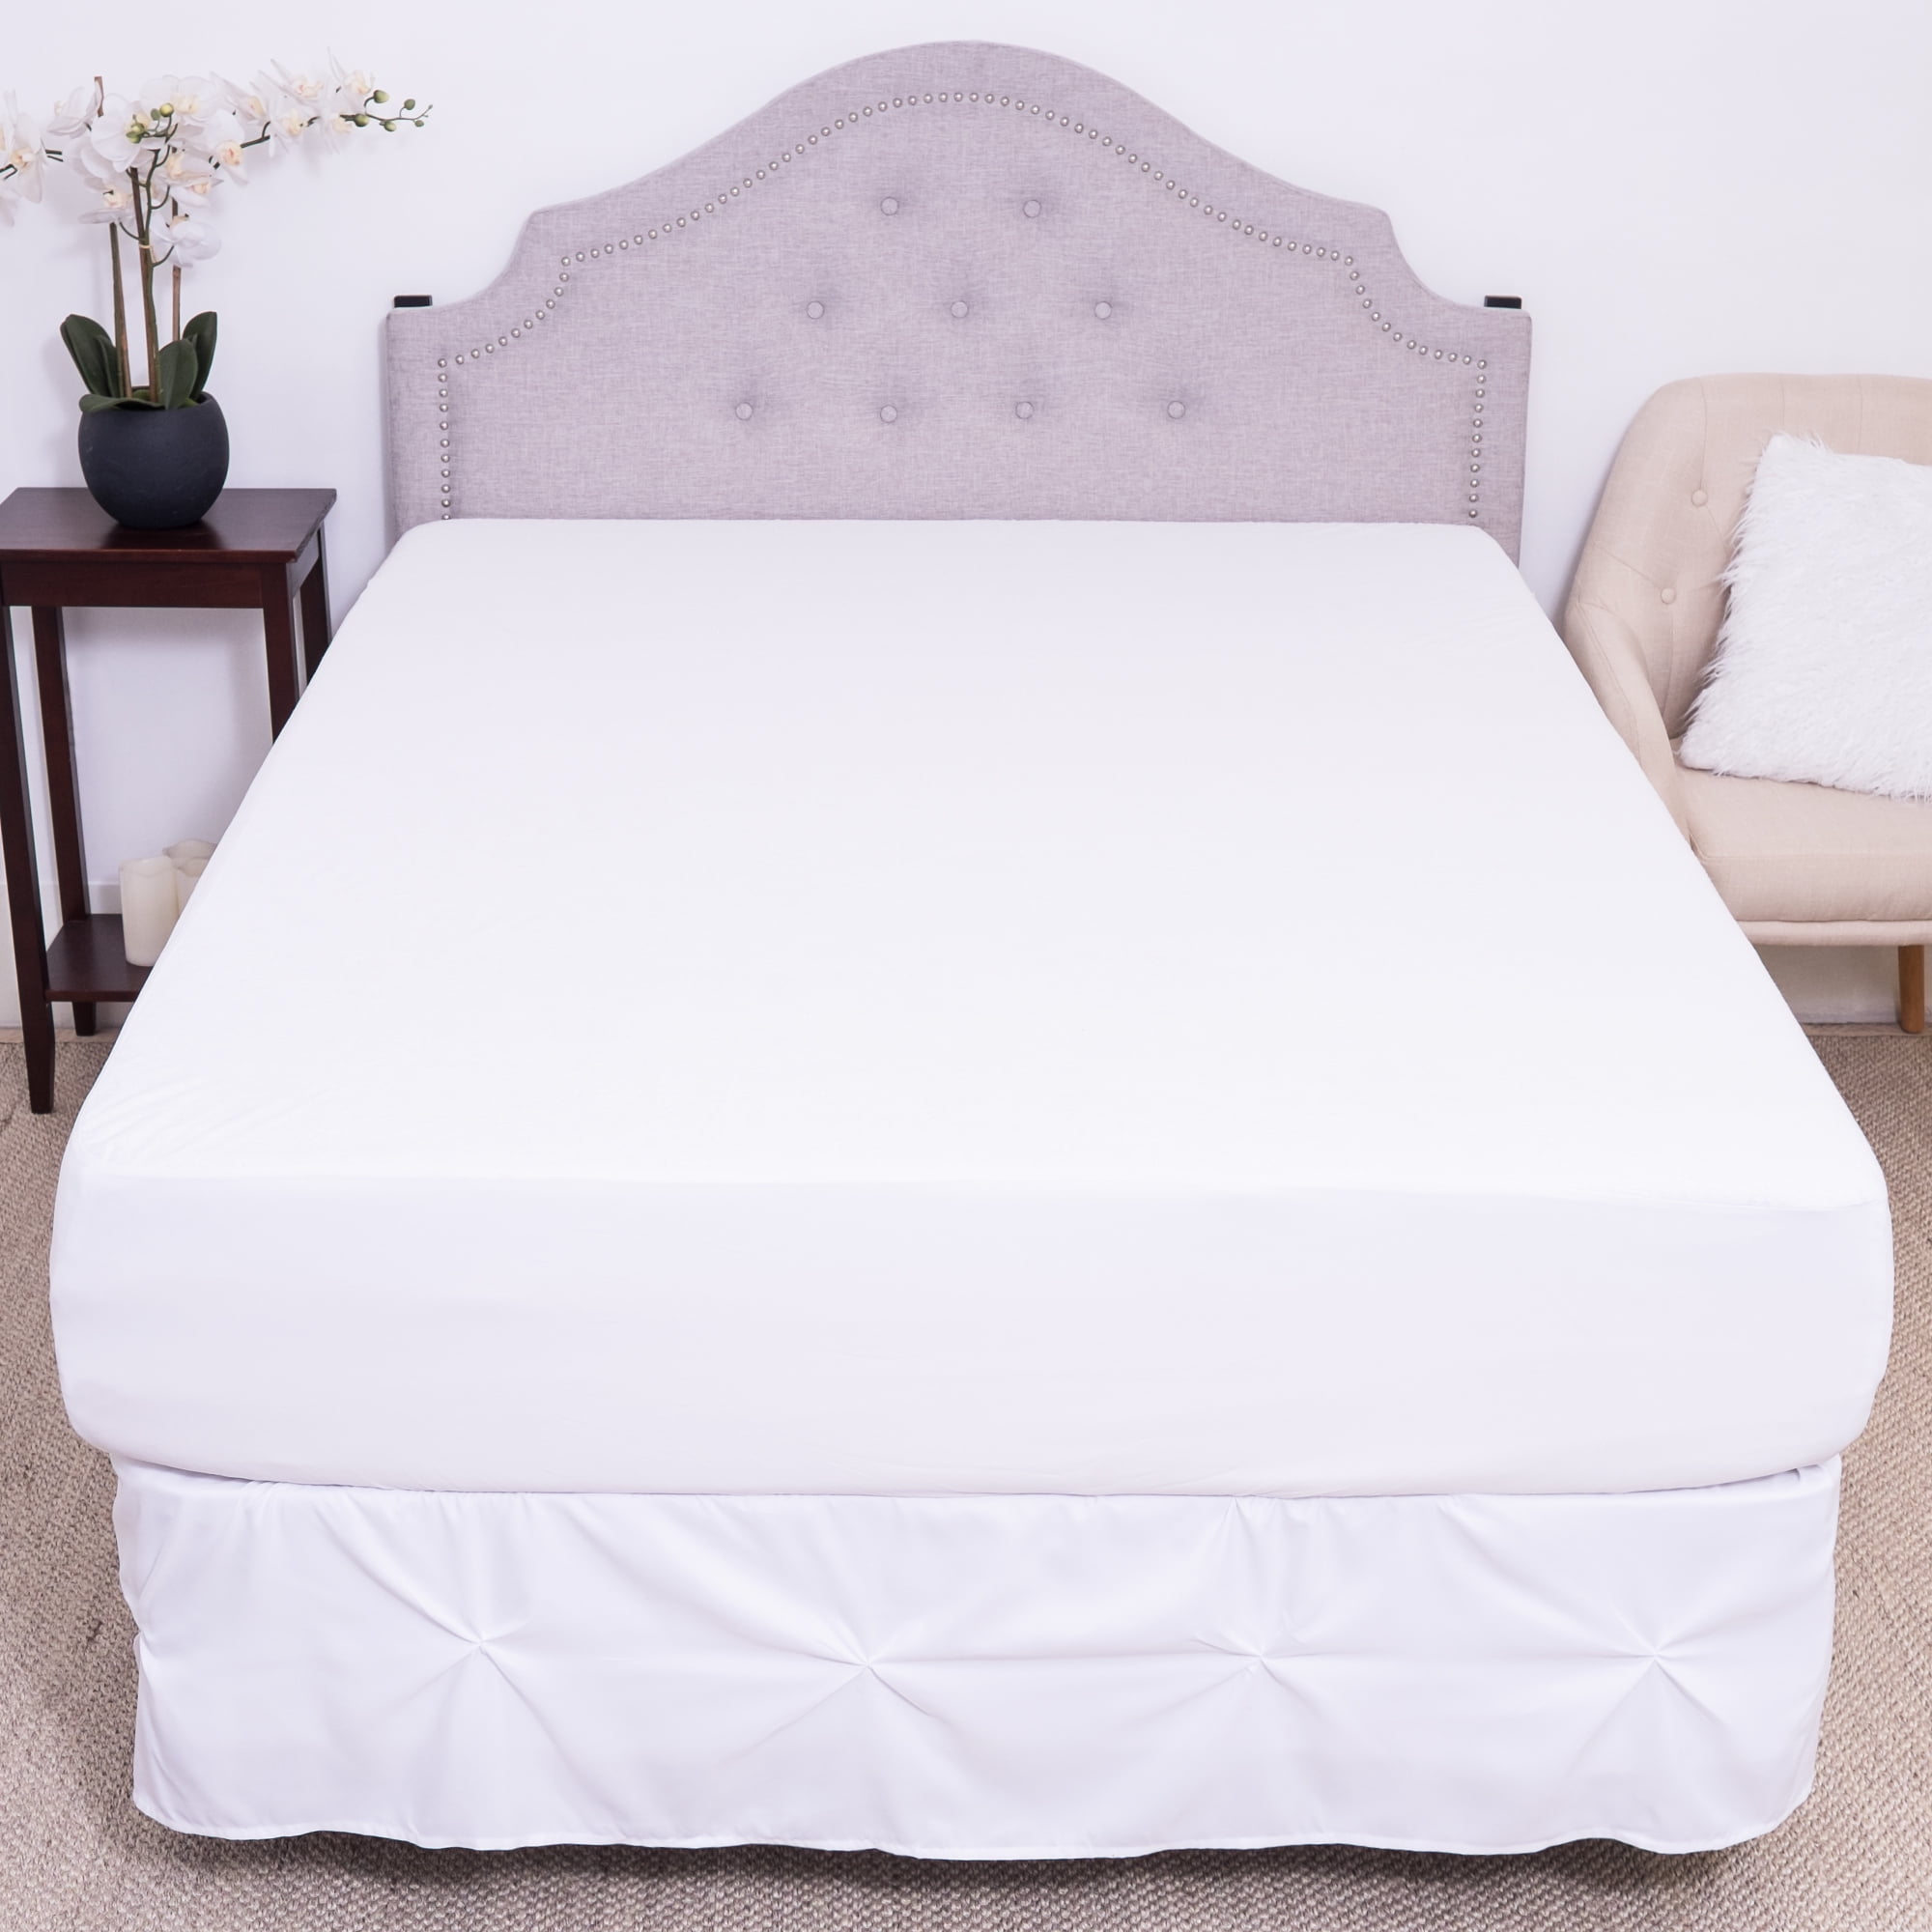 NEW Terry Towel 100% Waterproof Mattress Protector Fitted Wet Sheet Bed Cover 